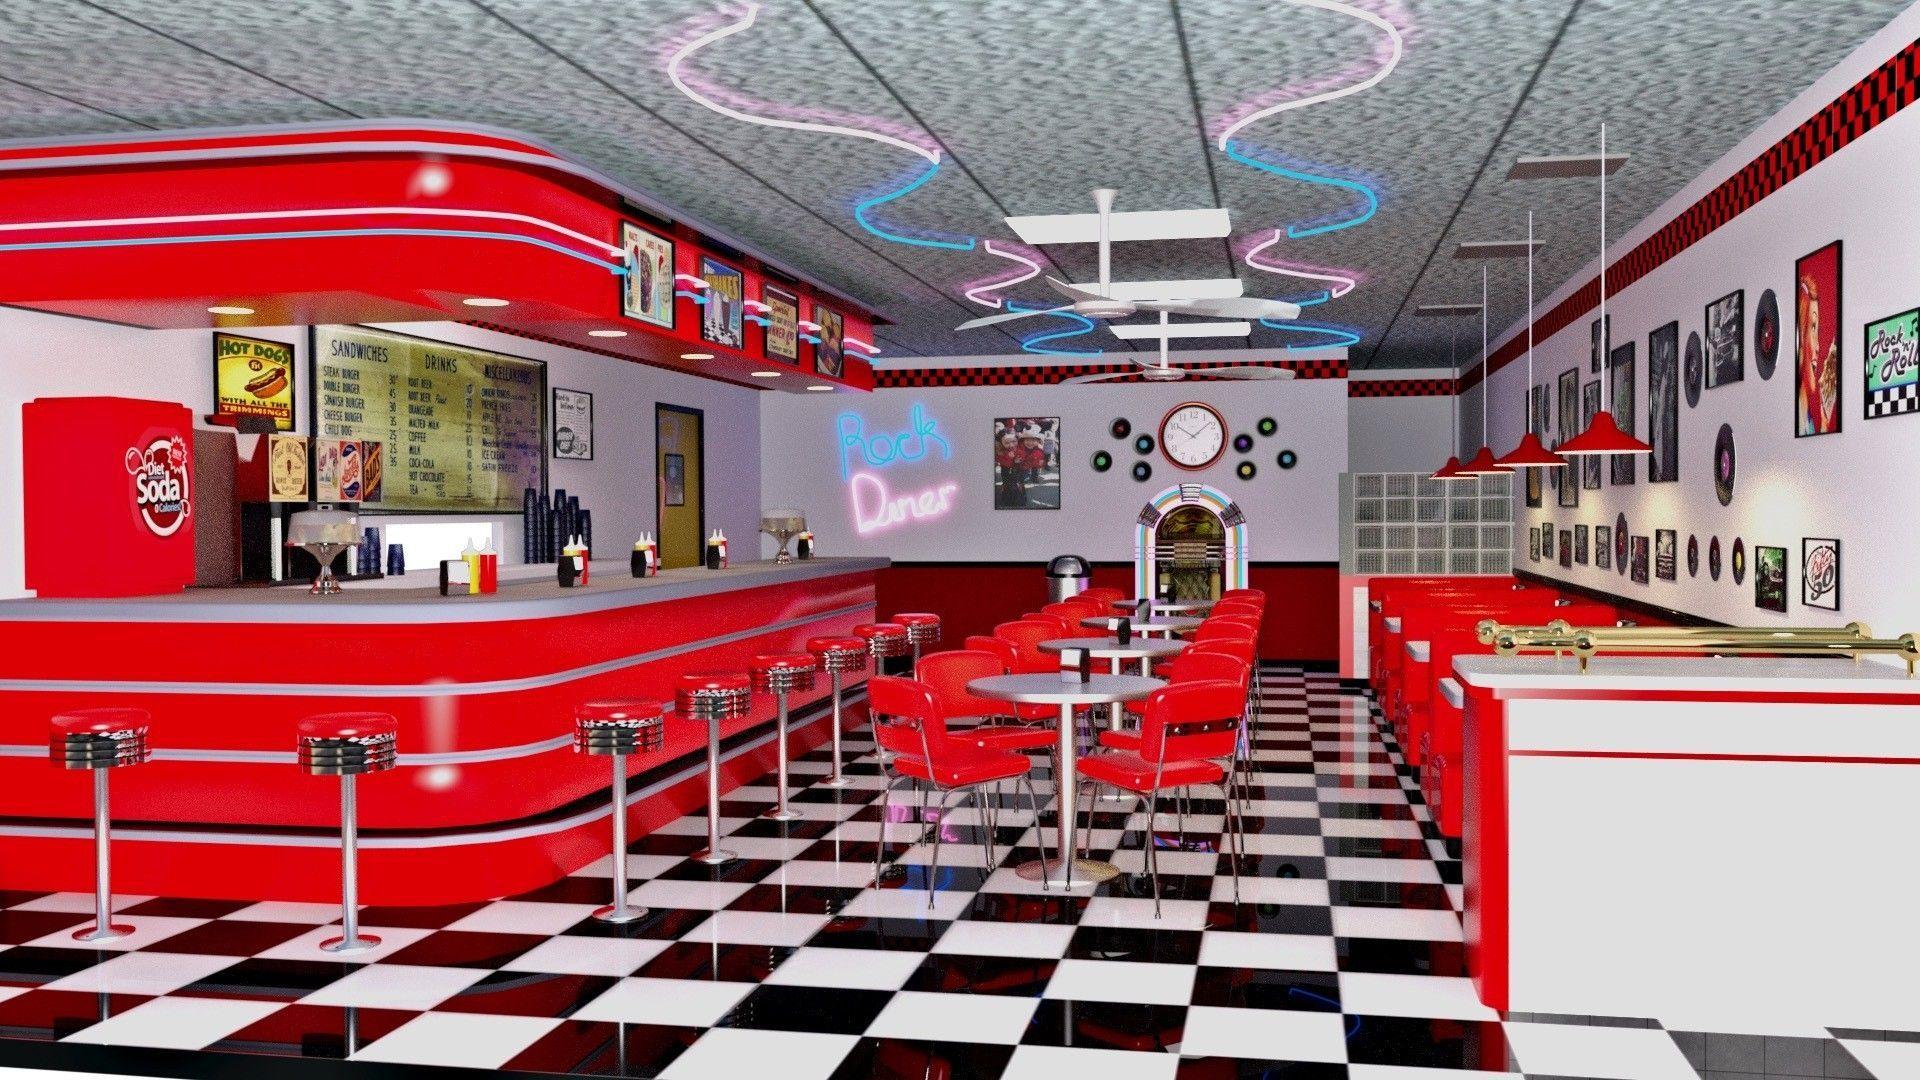 1950s Diner Wallpapers Top Free 1950s Diner Backgrounds Wallpaperaccess ...